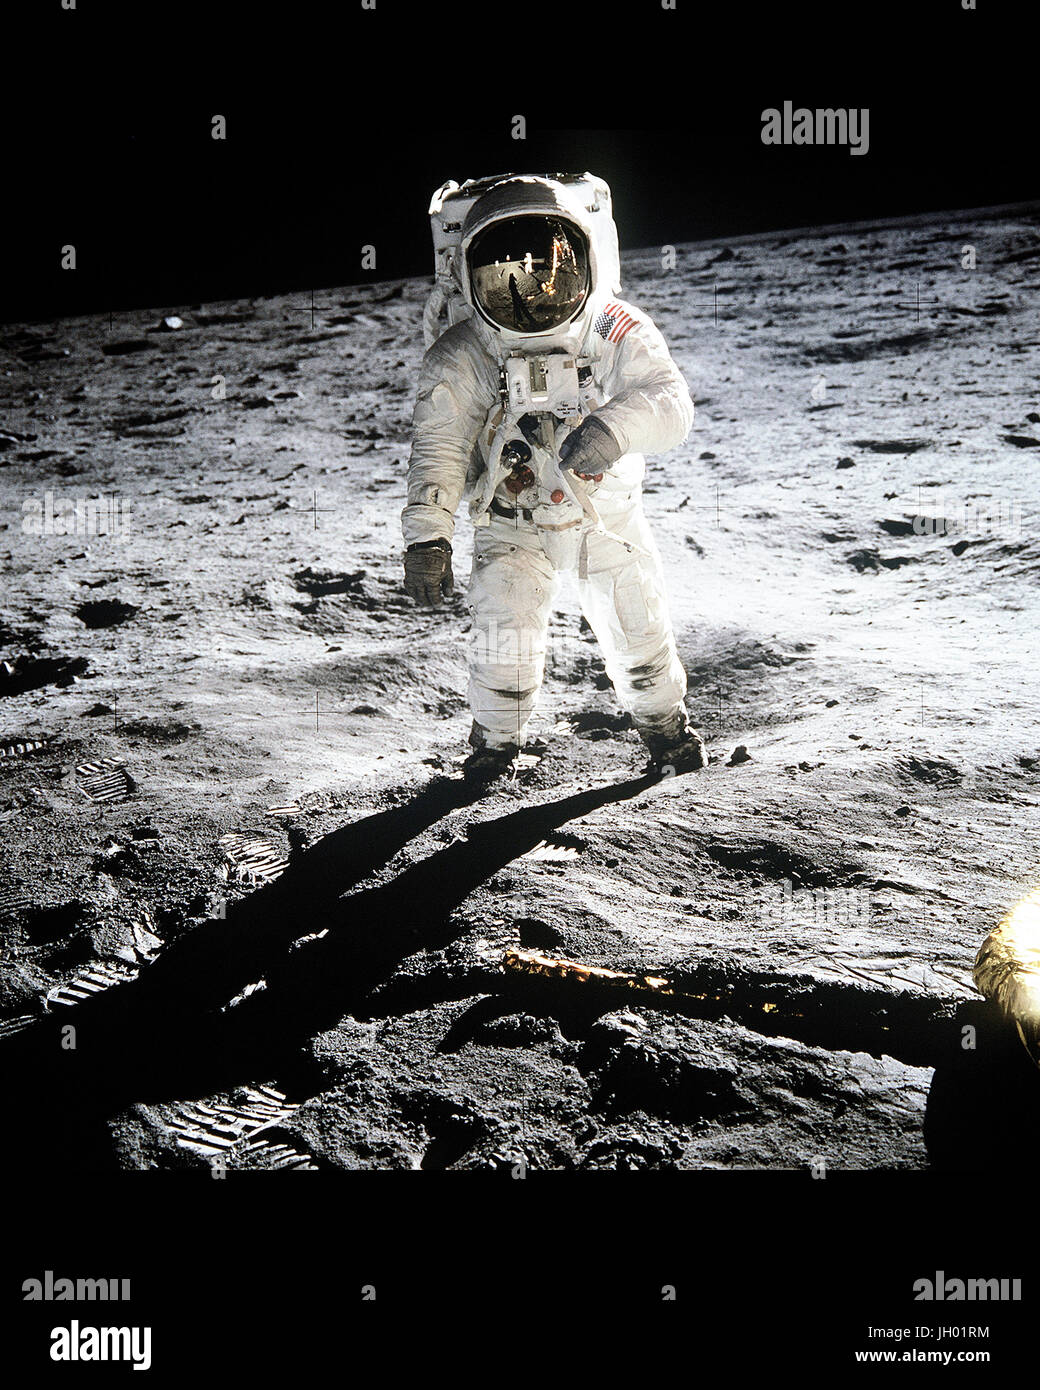 Astronaut Buzz Aldrin, lunar module pilot of the first lunar landing mission, poses for a photograph with the deployed United States flag reflected in his visor during an Apollo 11 Extravehicular Activity (EVA) on the lunar surface. The Lunar Module (LM) is on the left, and the footprints of the astronauts are clearly visible in the soil of the Moon. Astronaut Neil A. Armstrong, commander, took this picture with a 70mm Hasselblad lunar surface camera. Photograph by Neil A. Armstrong / NASA Stock Photo